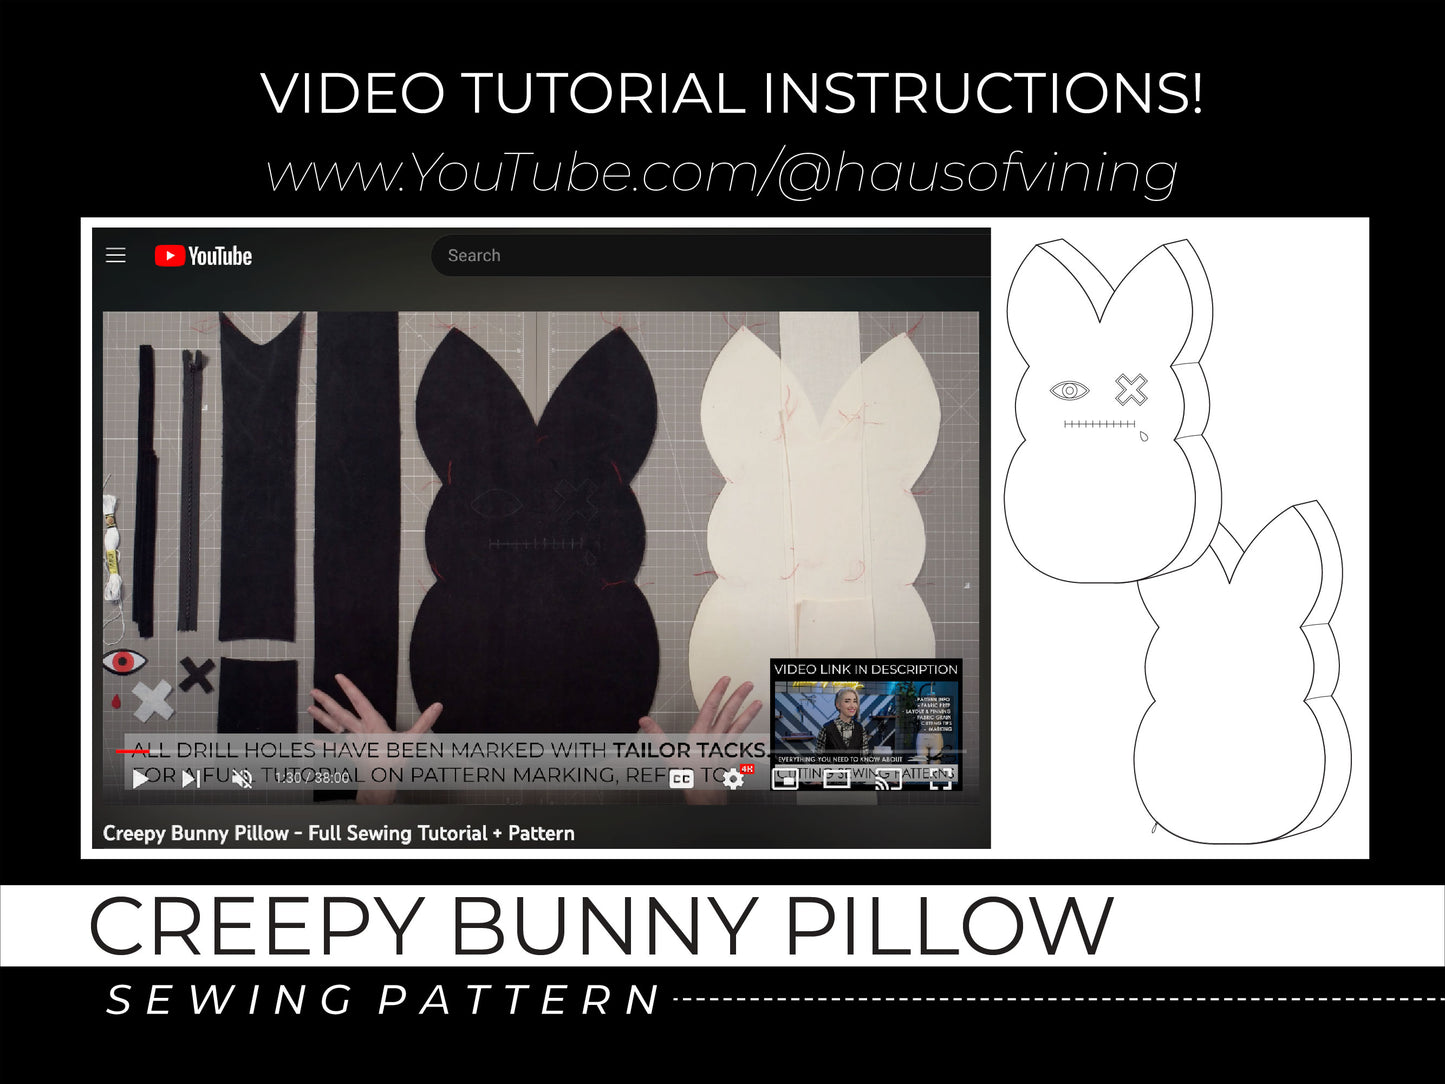 Creepy Bunny Pillow Sewing Pattern (PRINTED PATTERN) w/ Video Tutorial